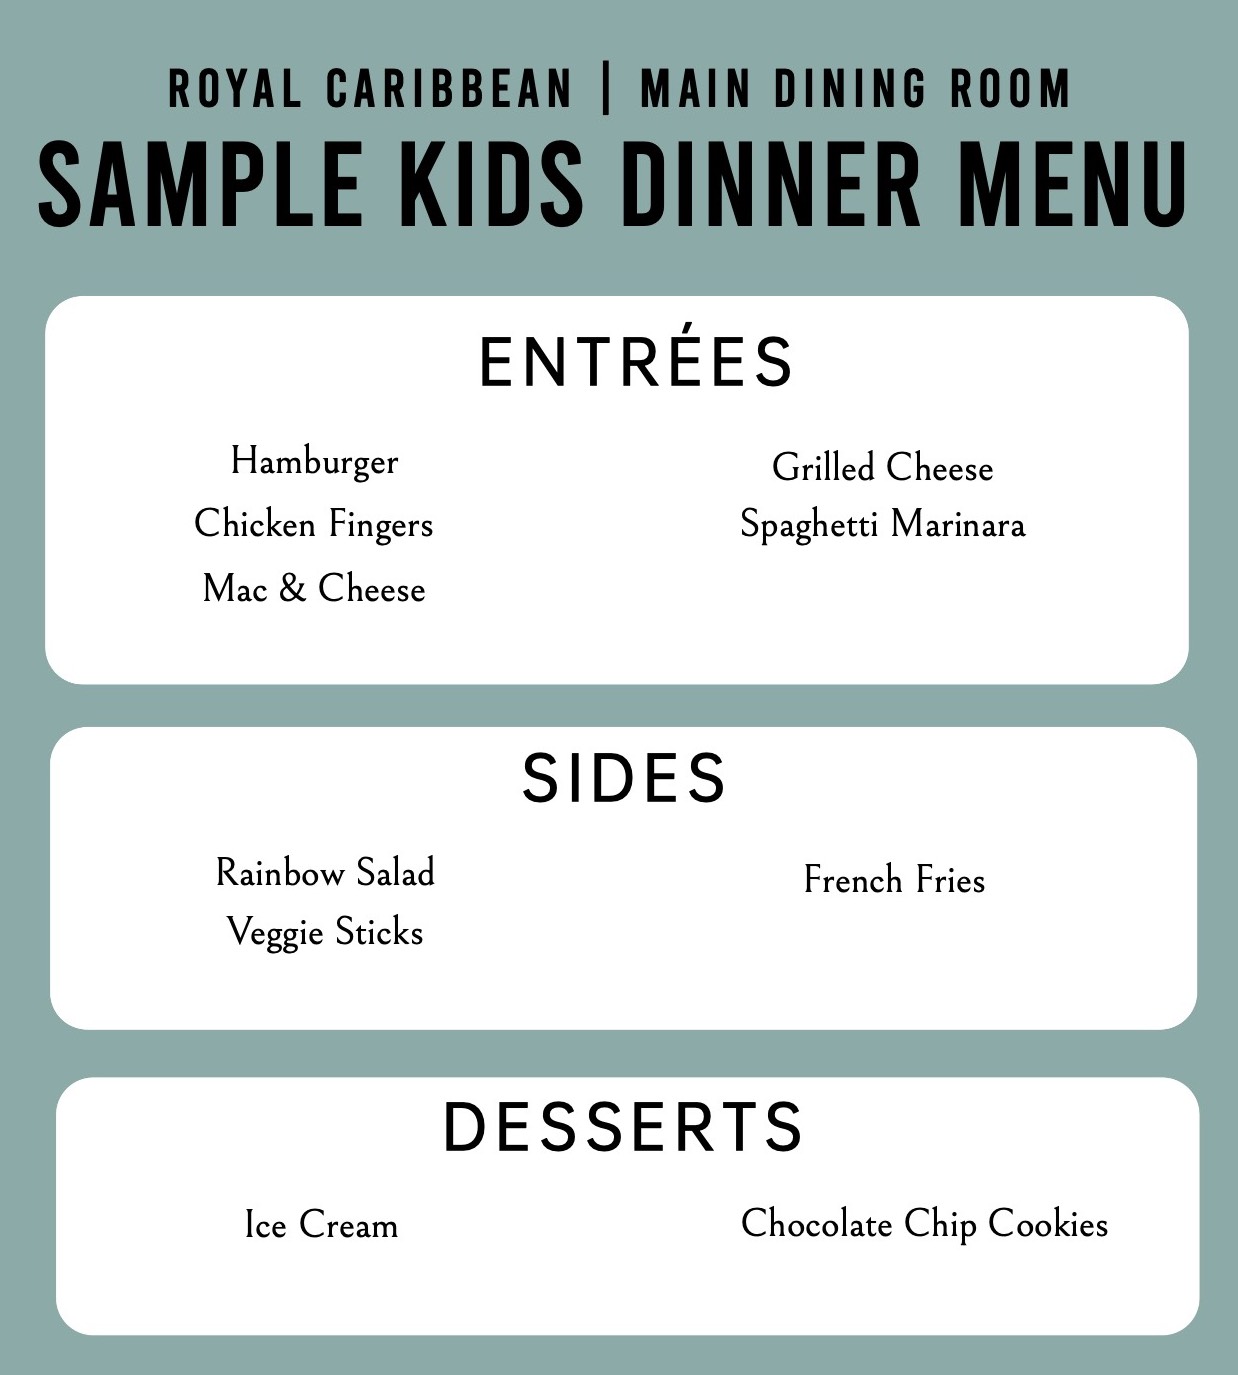 Sample Royal Caribbean Main Dining Room kids' dinner menu: hamburger, grilled cheese, chicken fingers, veggie sticks, french fries, ice cream, and chocolate chip cookies